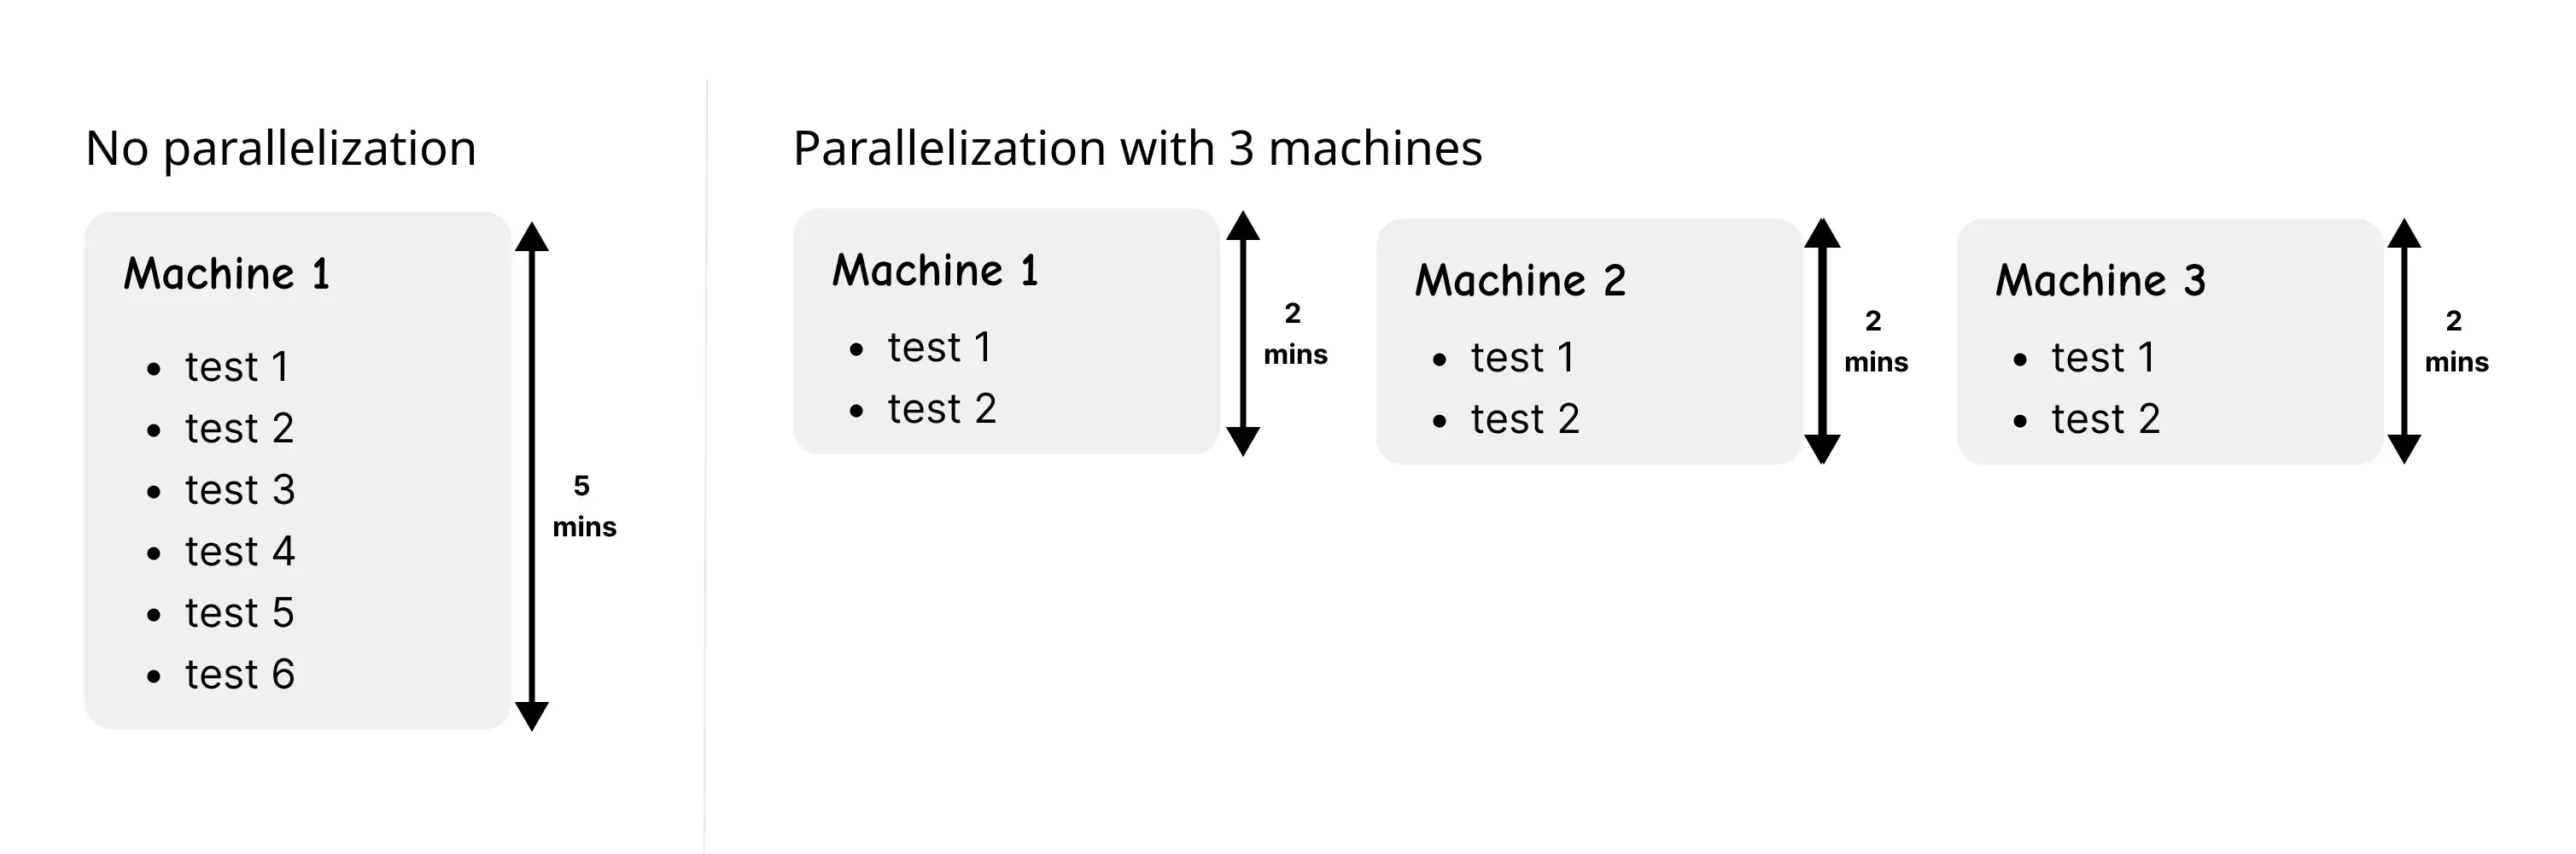 Tests with and without parallelization